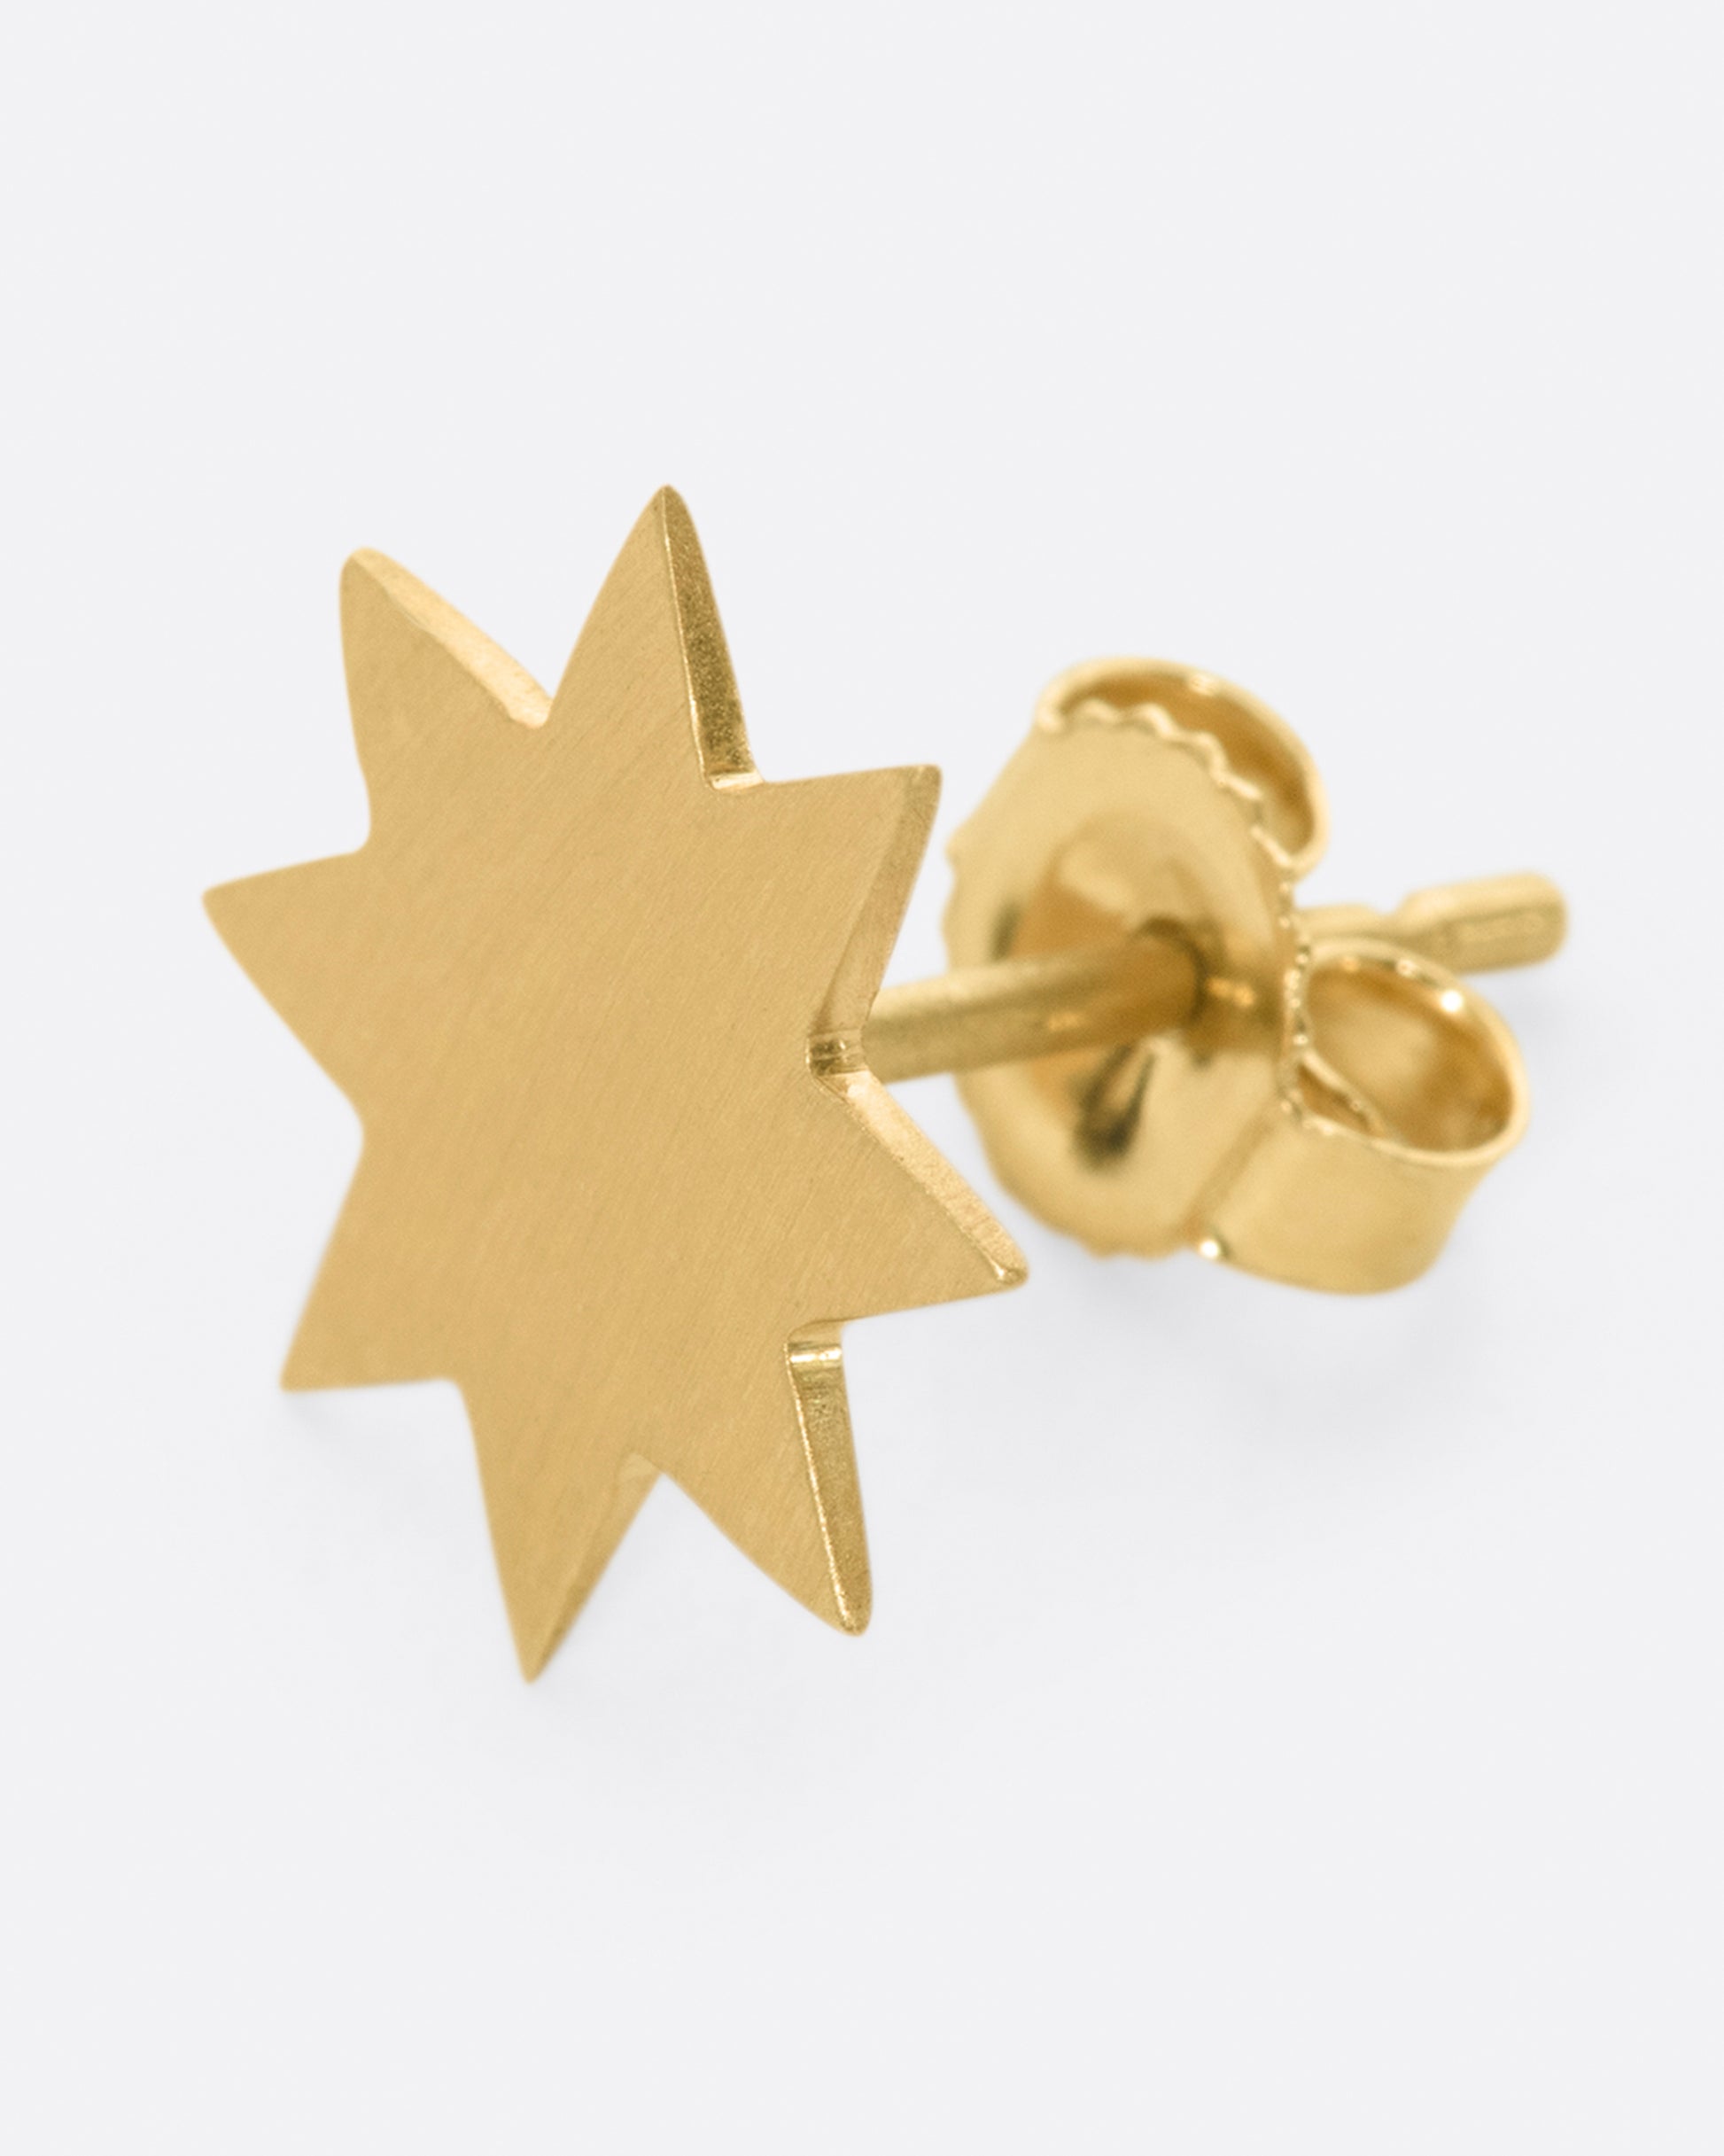 A round, matte star earring; perfectly paired with another star of a different color.